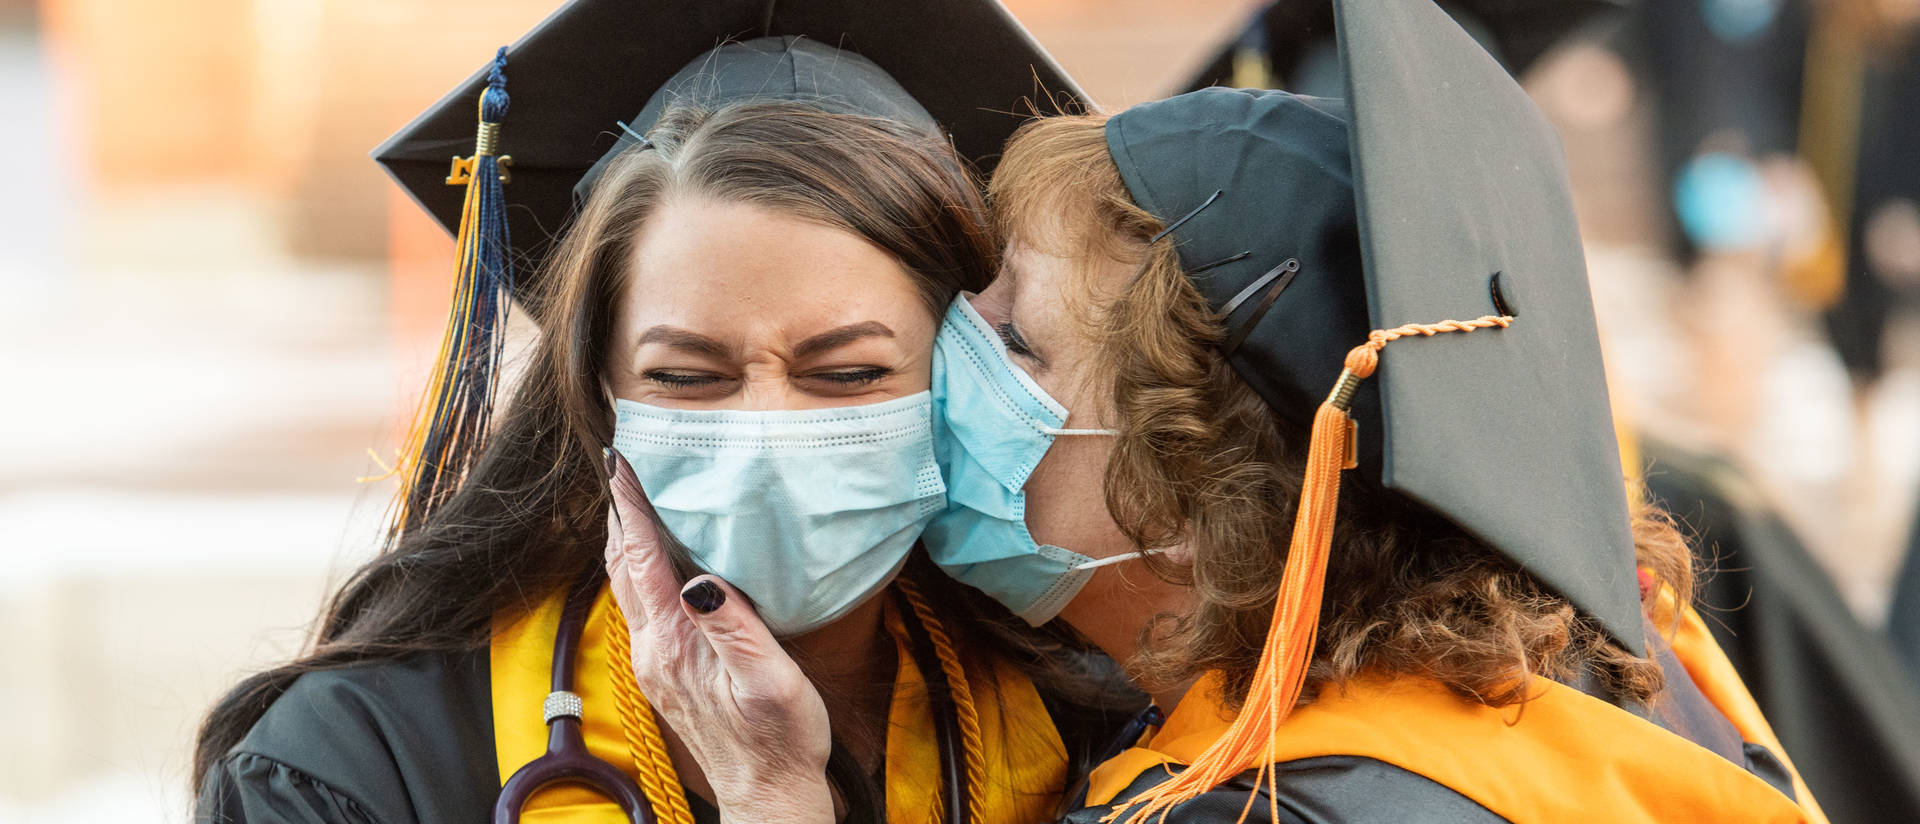 Women in masks and graduation caps exchange a kiss on the cheek.